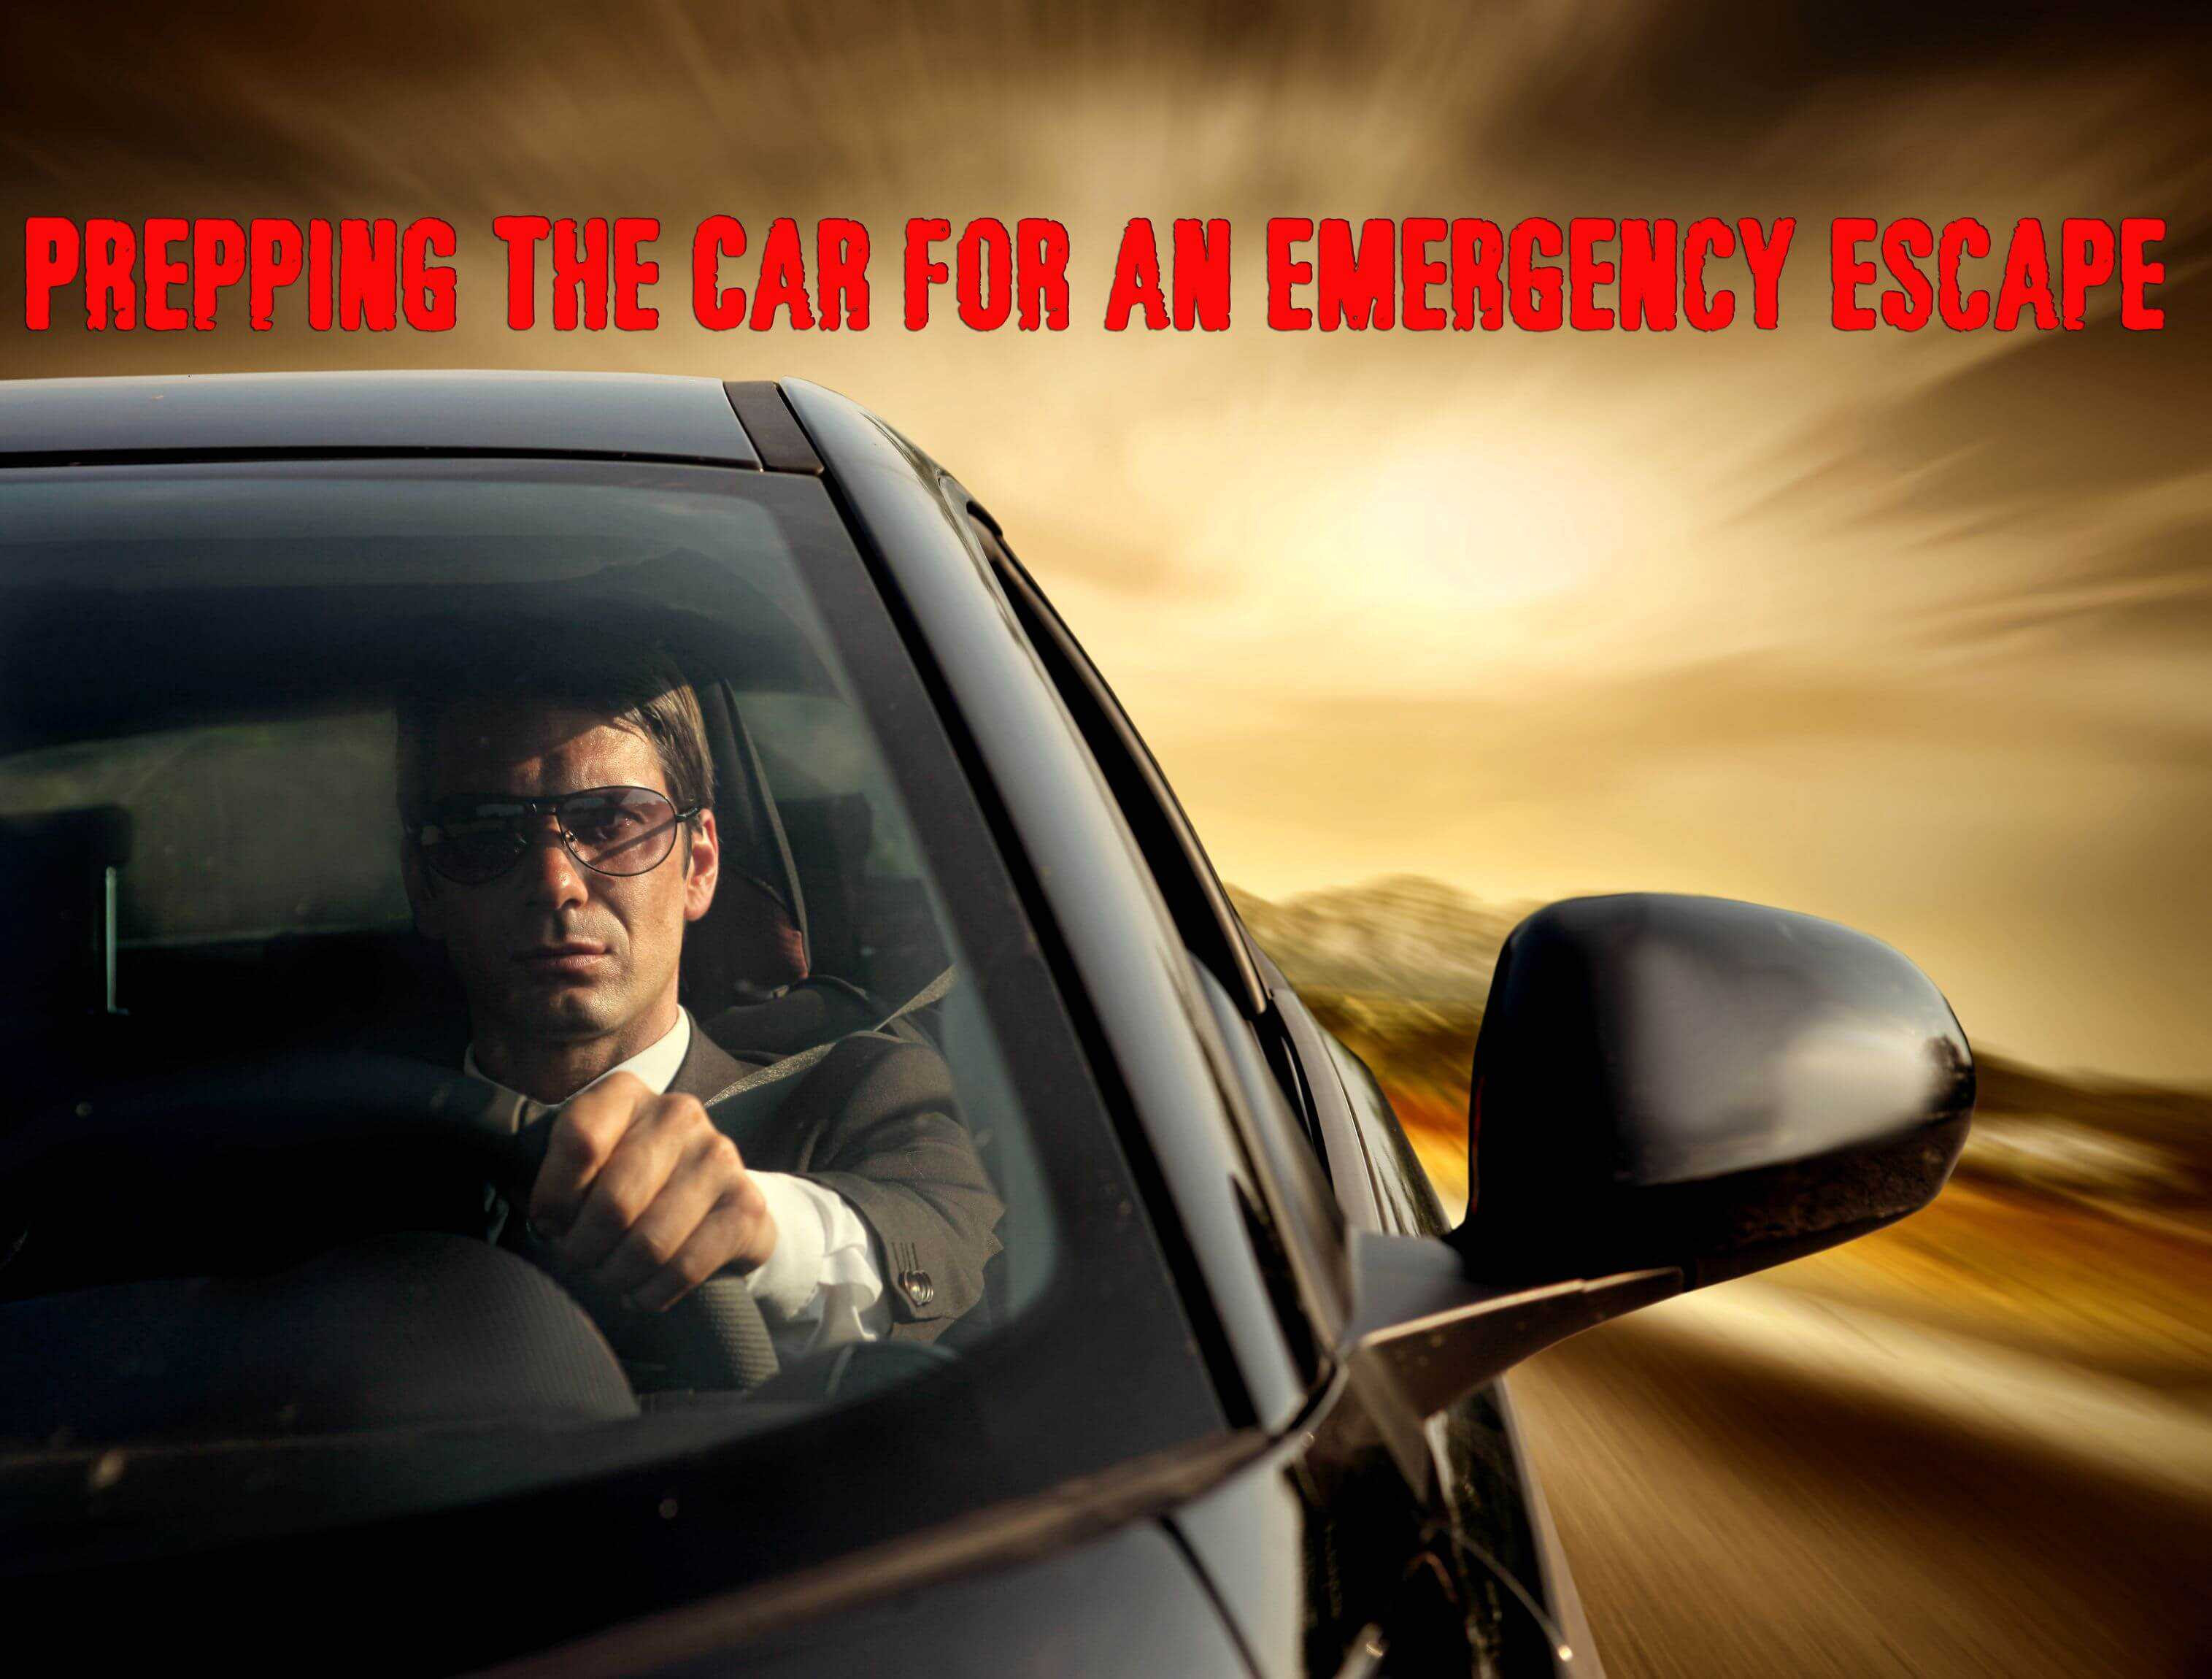 Prepare Your Car for an Emergency Evacuation